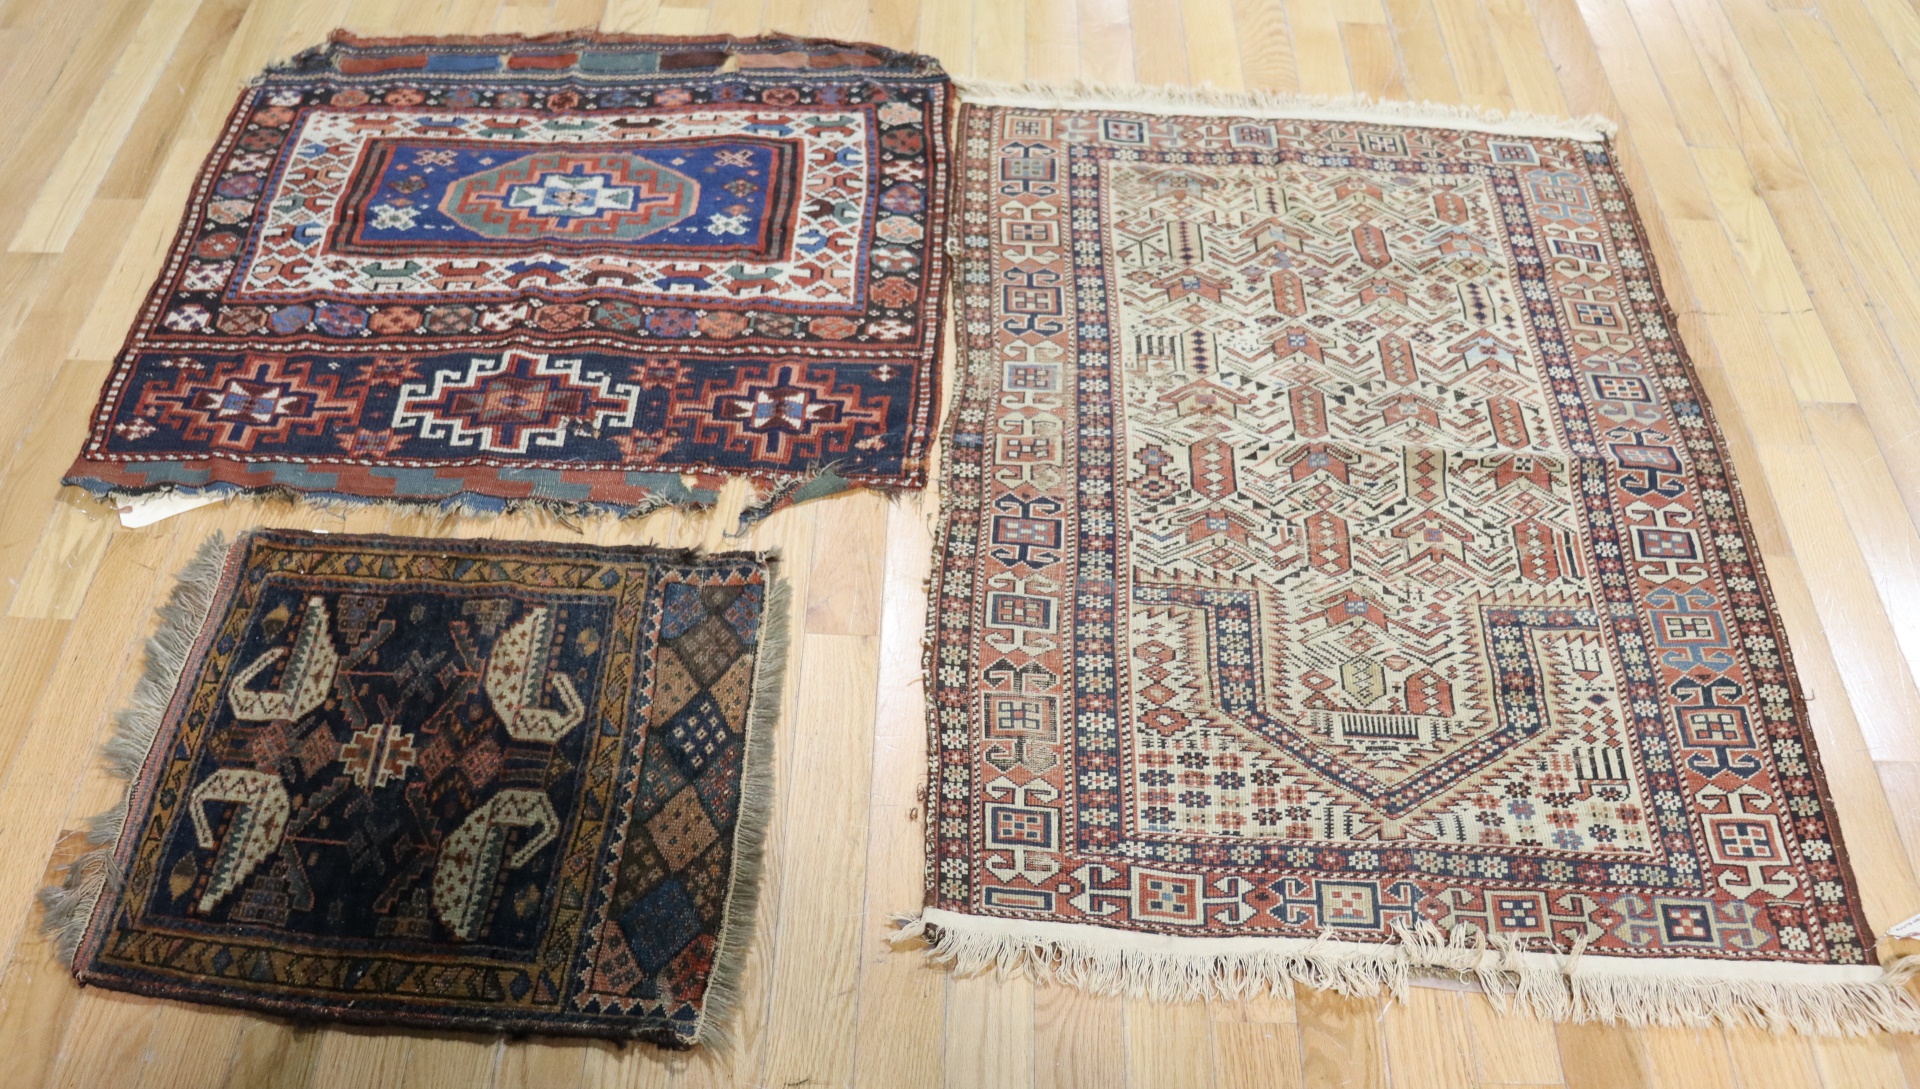 3 ANTIQUE & FINELY HAND WOVEN AREA